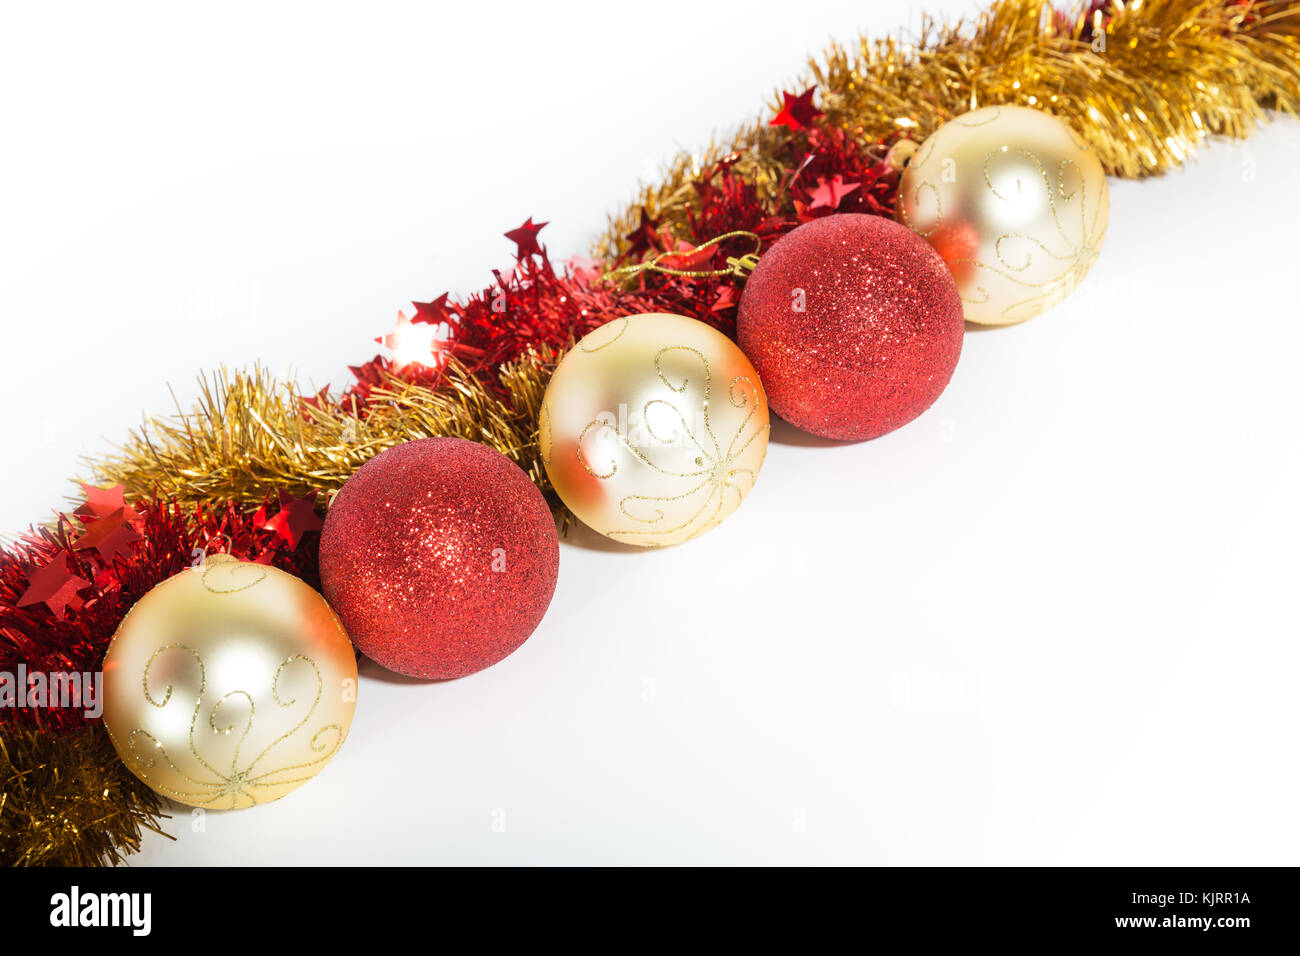 Christmas decorations red and golden color on a white background - balls and tinsel Stock Photo